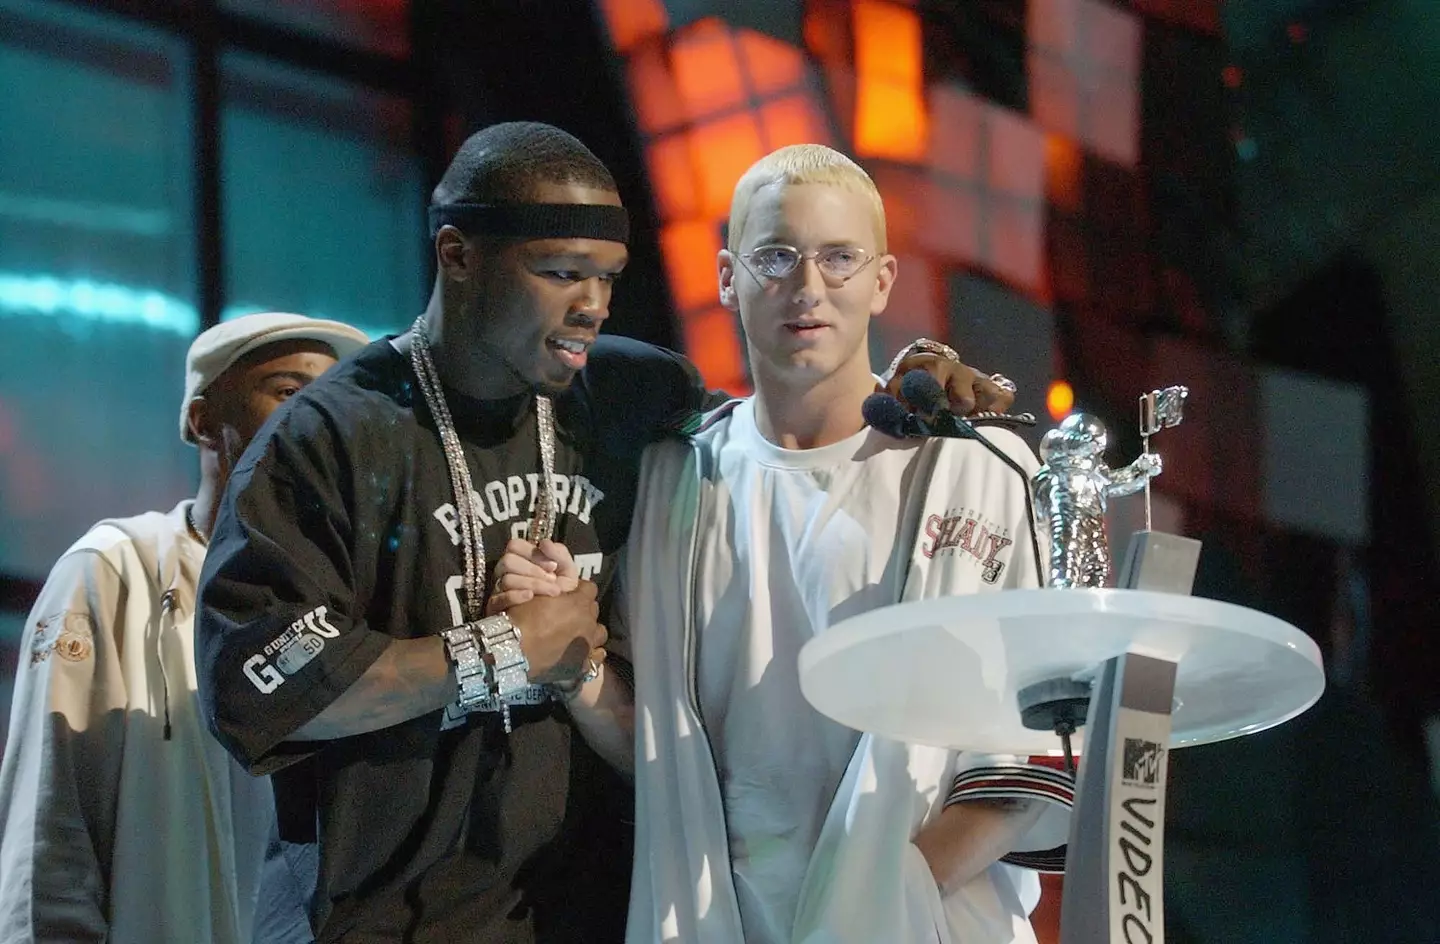 Eminem and 50 cent pictured at the 2003 MTV Video Music Awards.